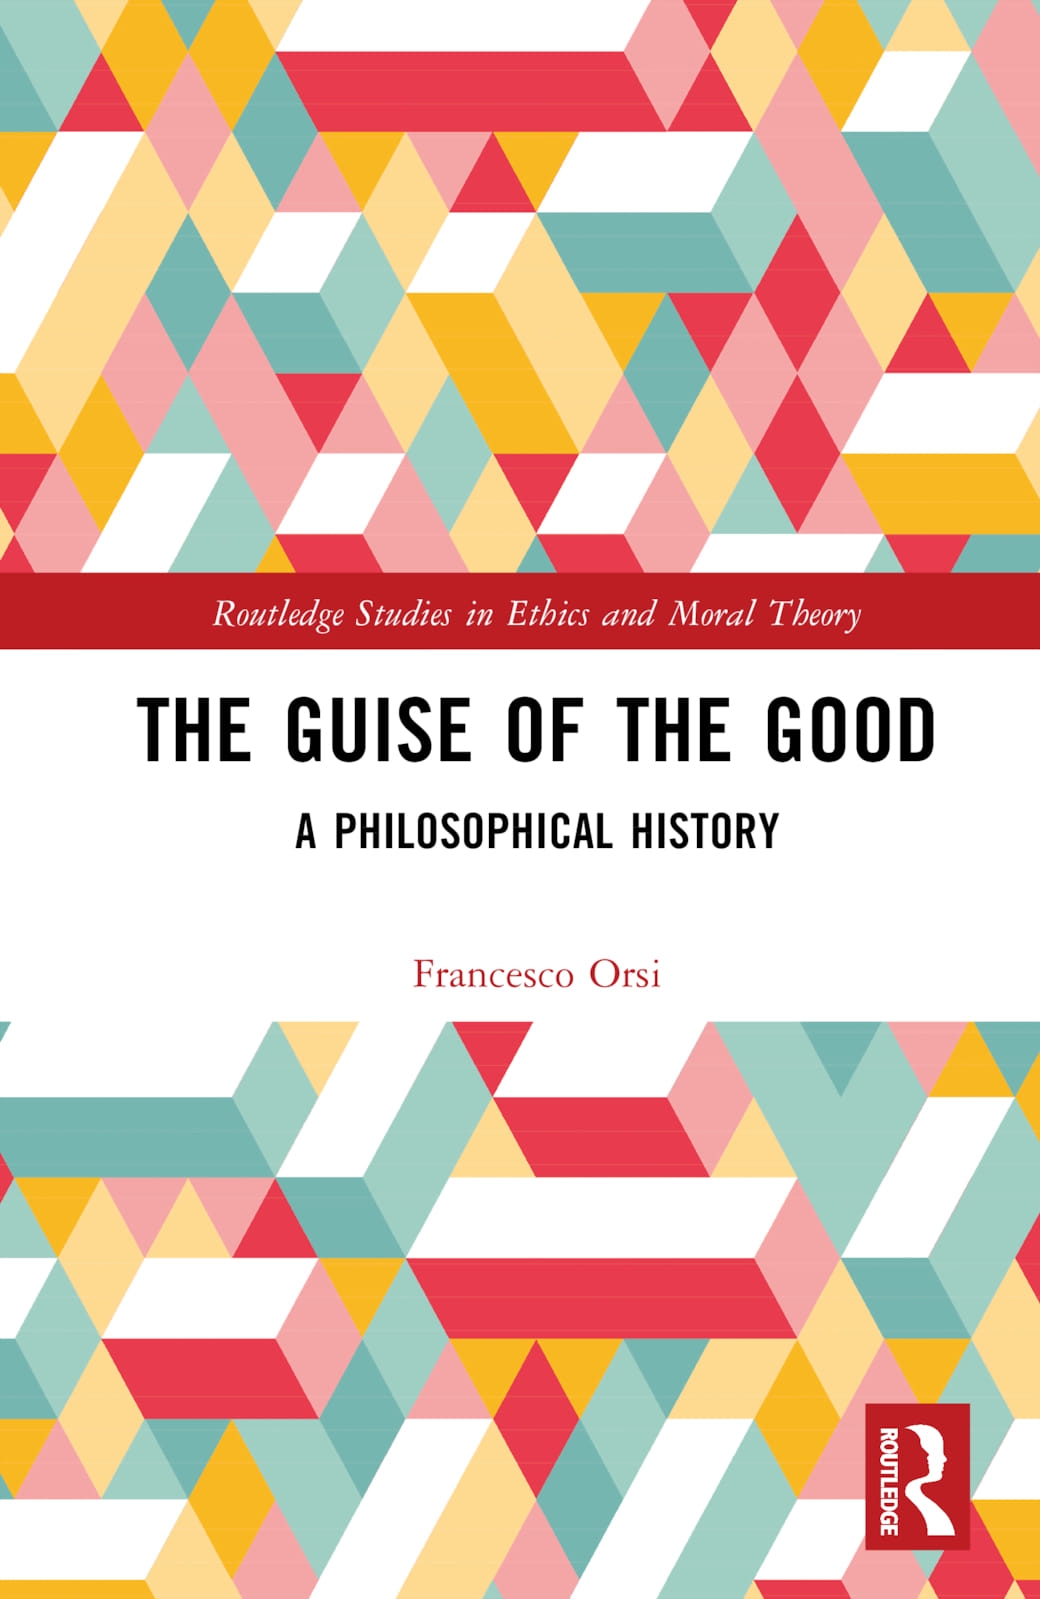 The Guise of the Good: A Philosophical History